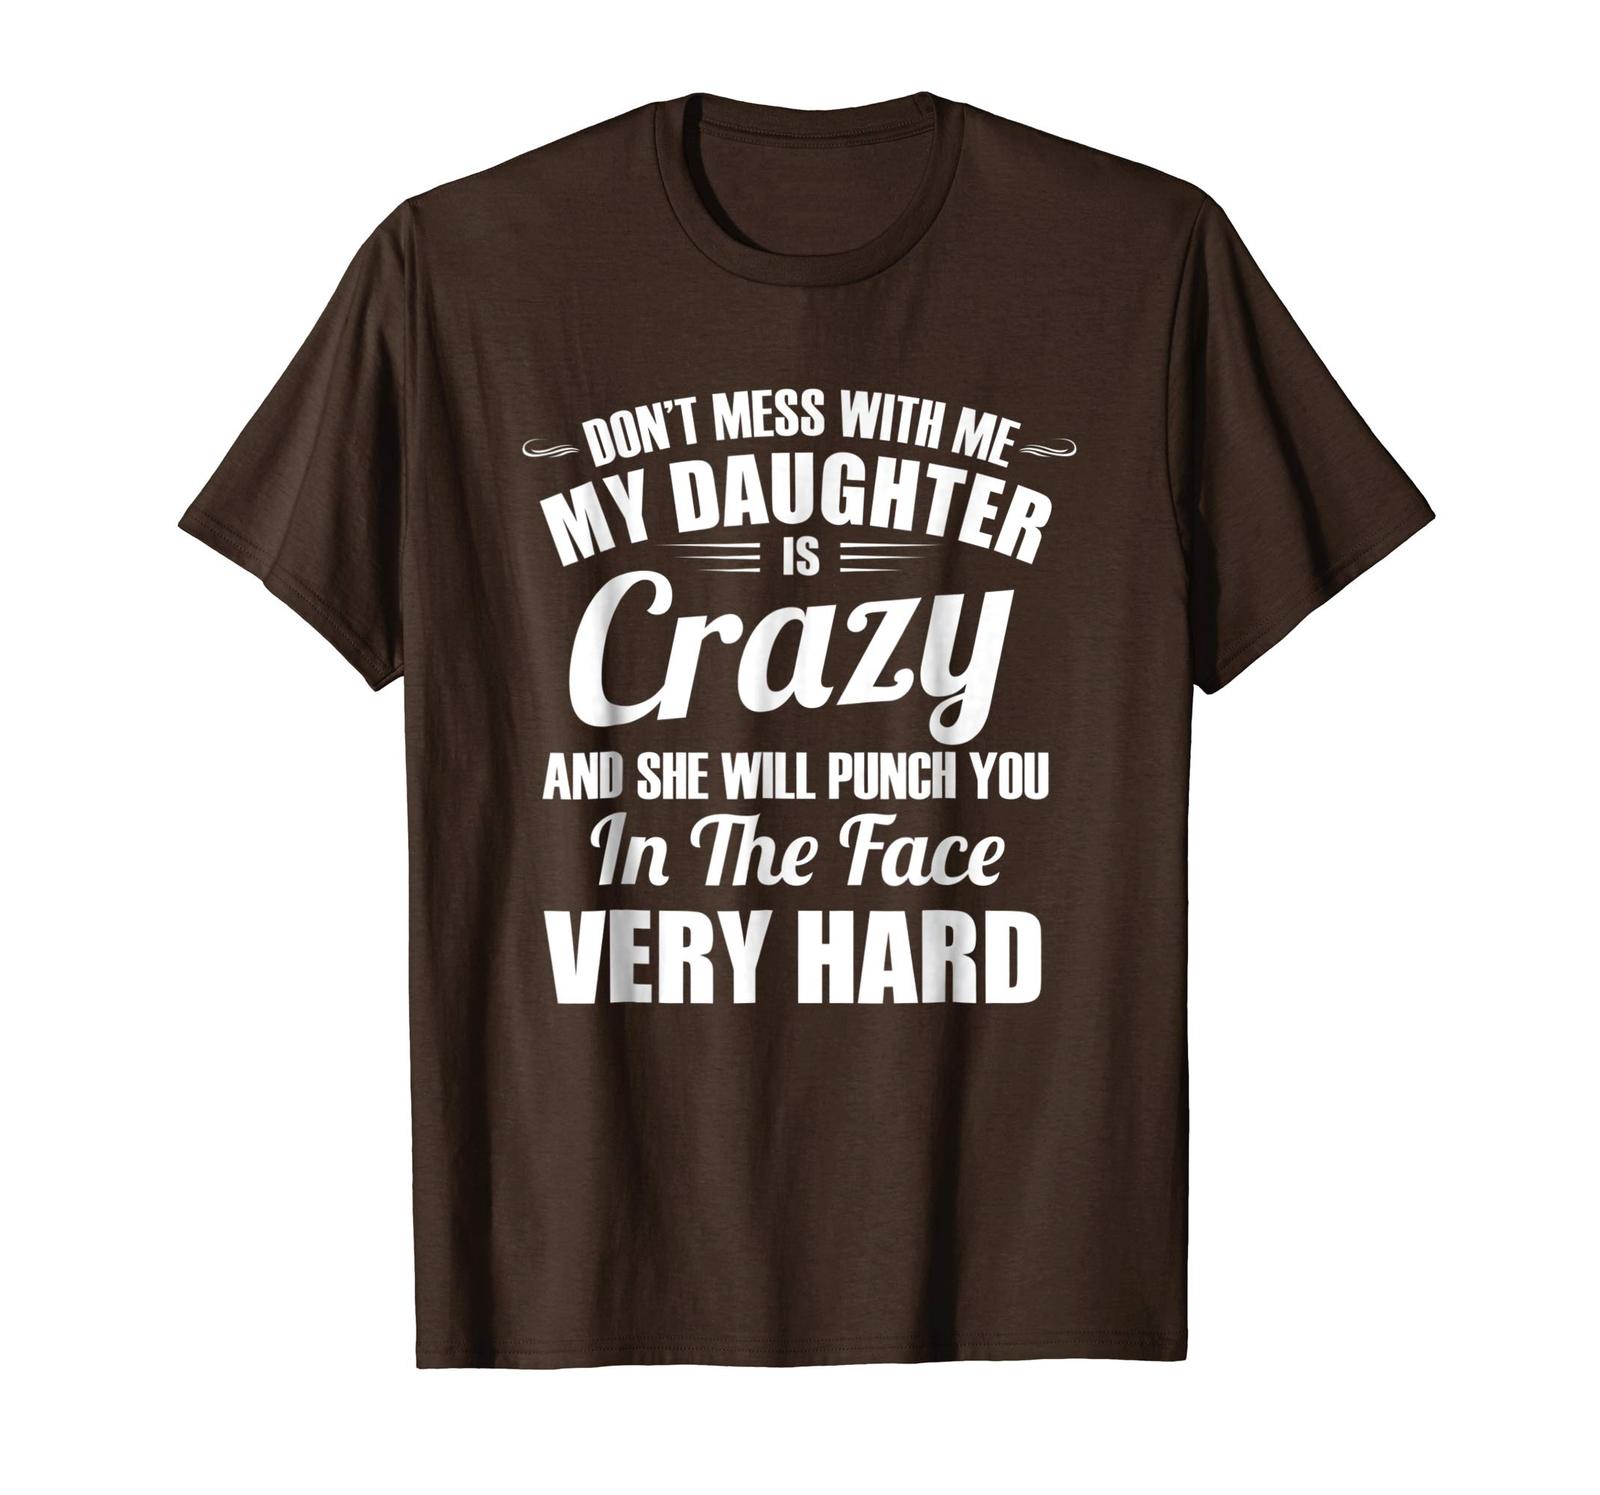 New Tee - Don't Mess With Me My Daughter Is Crazy Shirt for Women Men ...